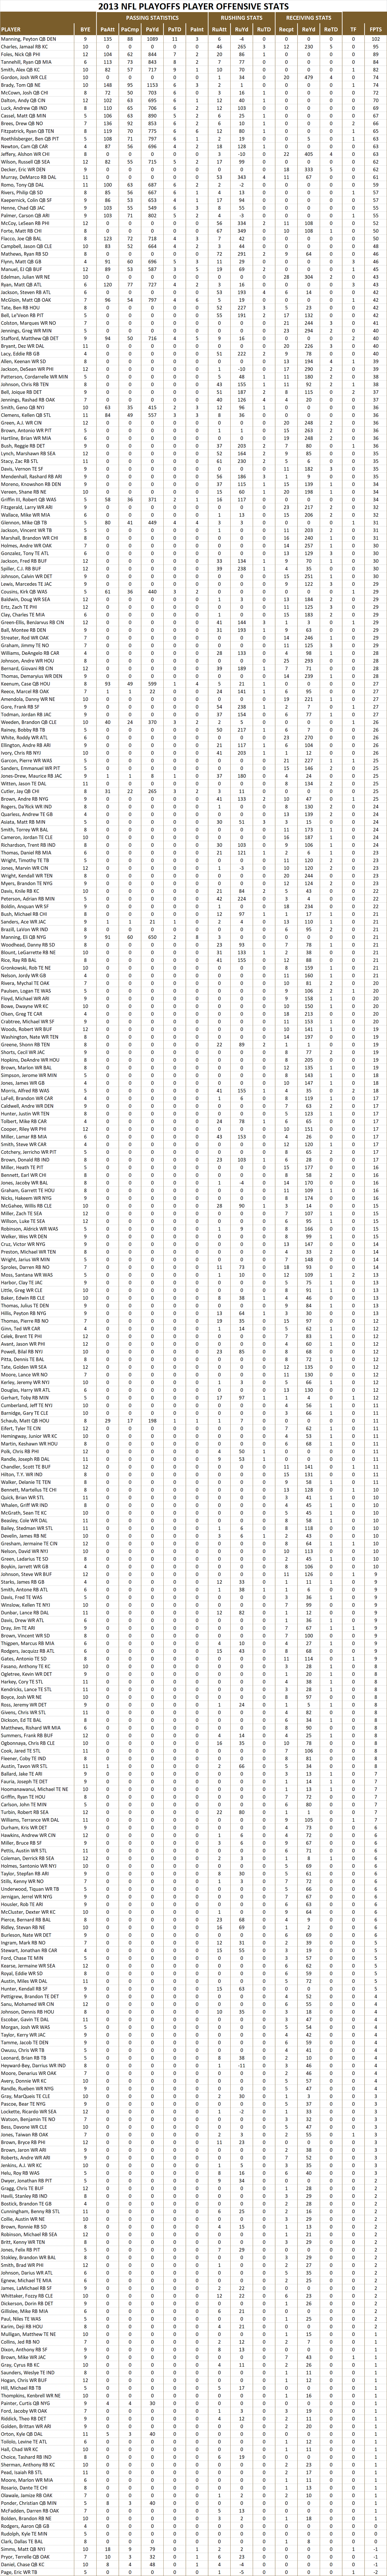 2013 National Football League Pool Playoff Player Offensive Stats